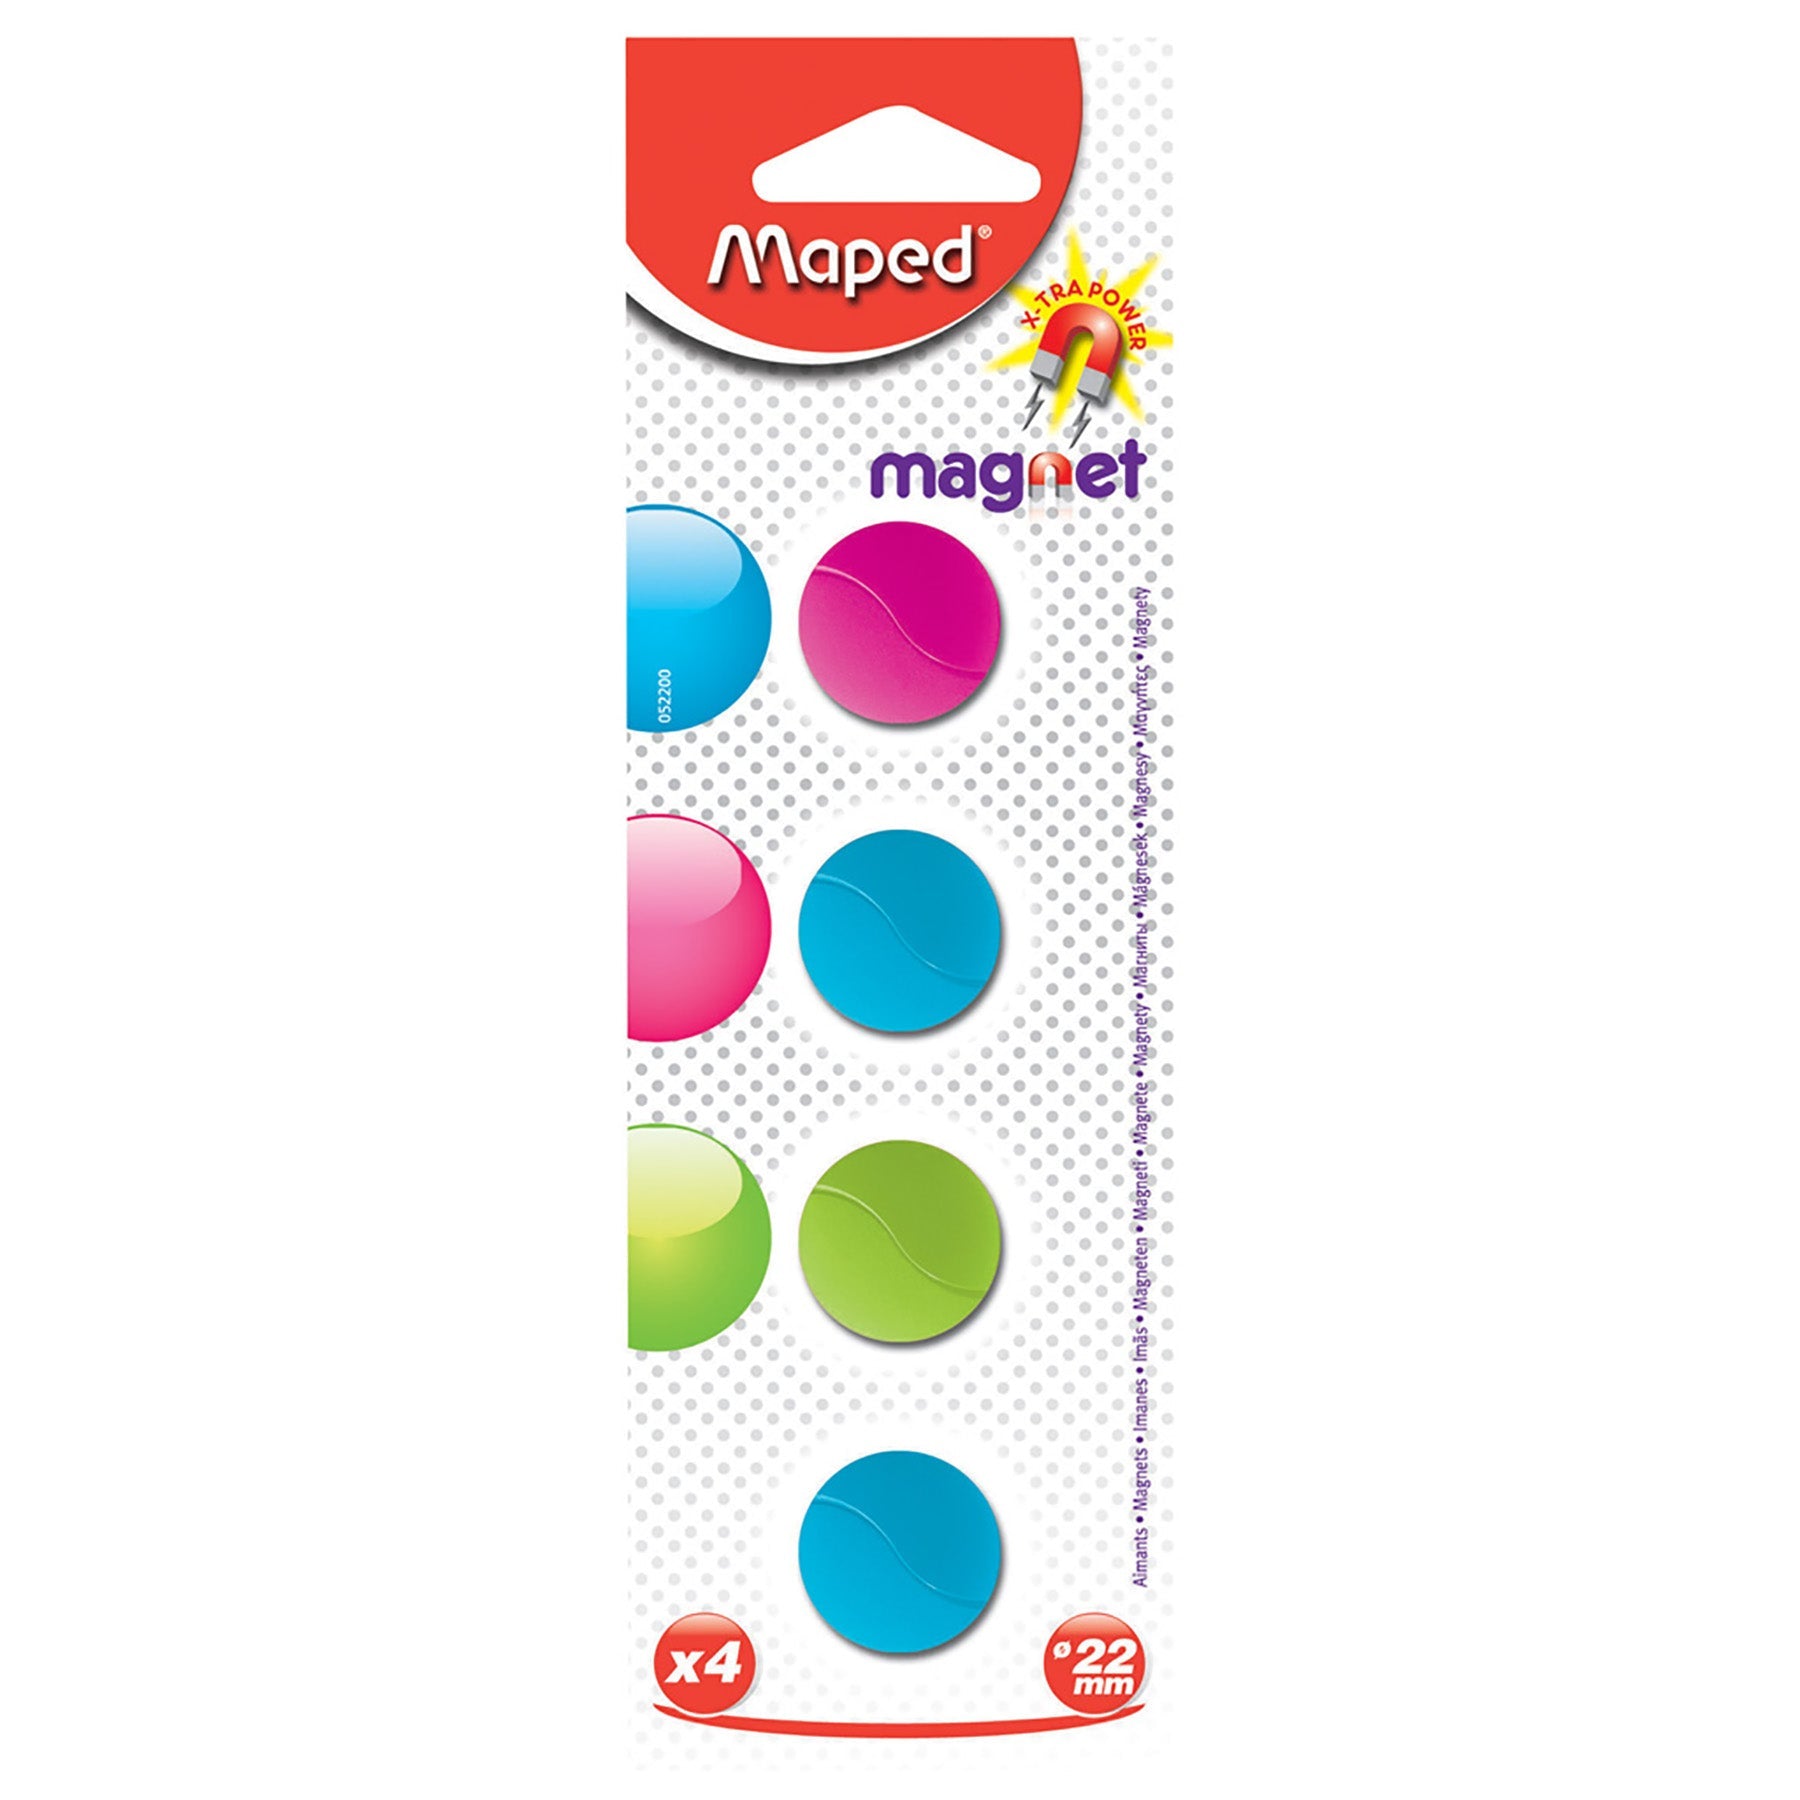 Maped 4 Magnets Round Plastic 0.86in